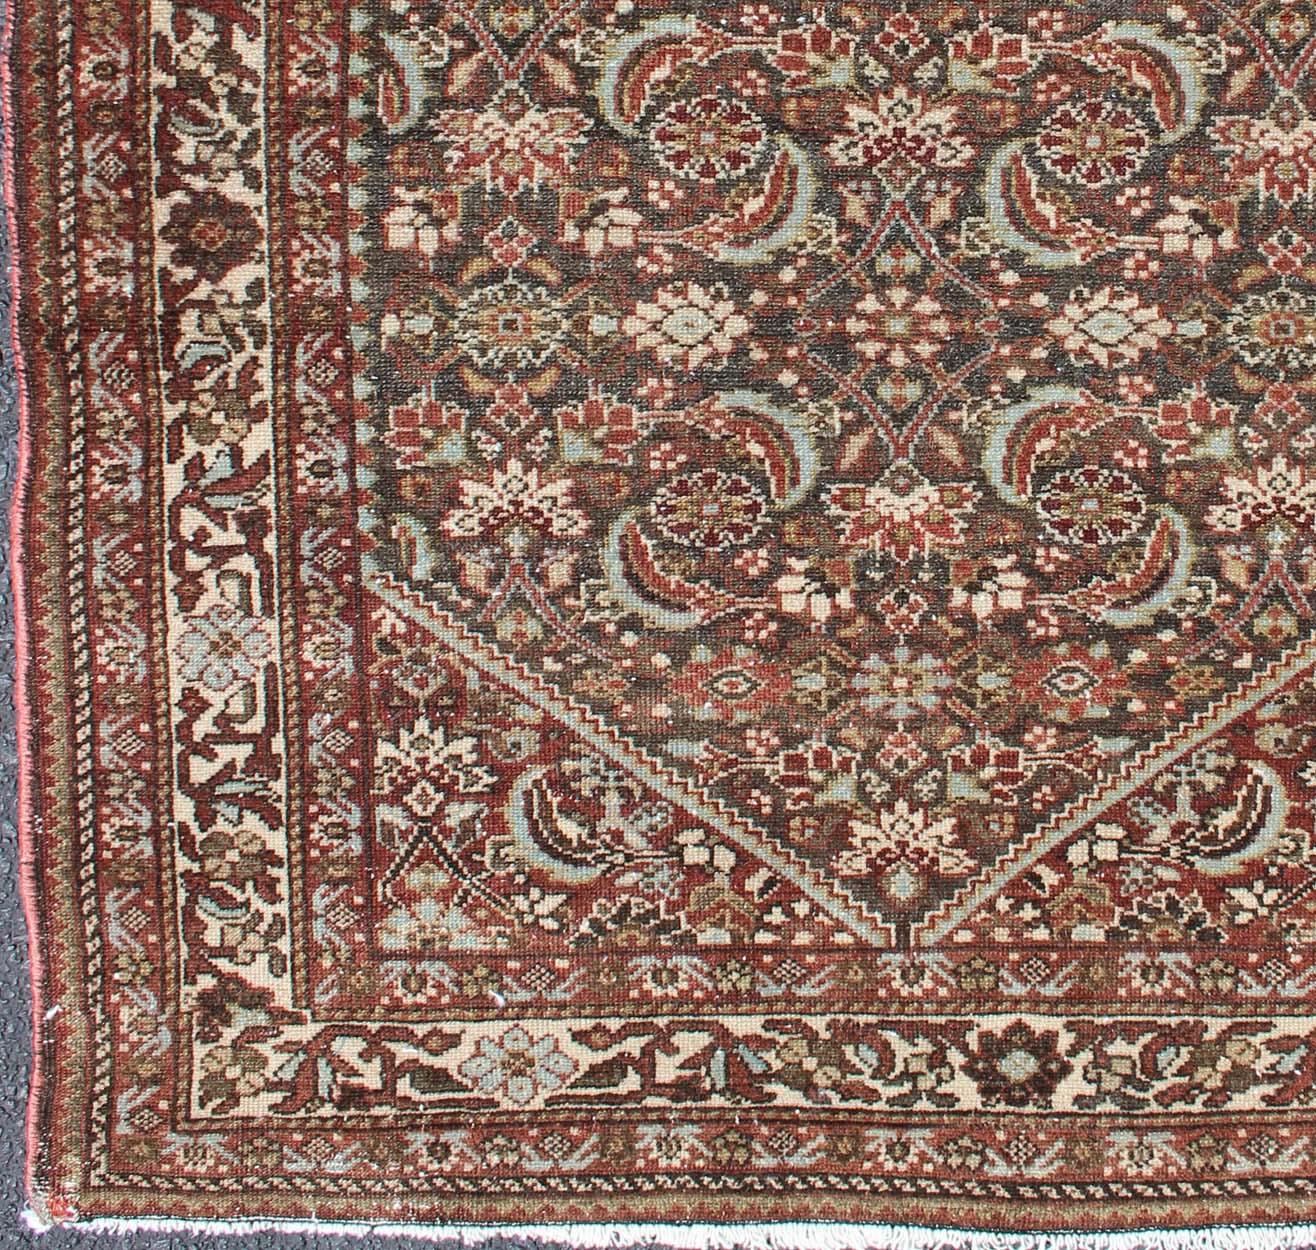 Hand-Knotted Antique Persian Hamadan Rug with Colorful Geometric Design